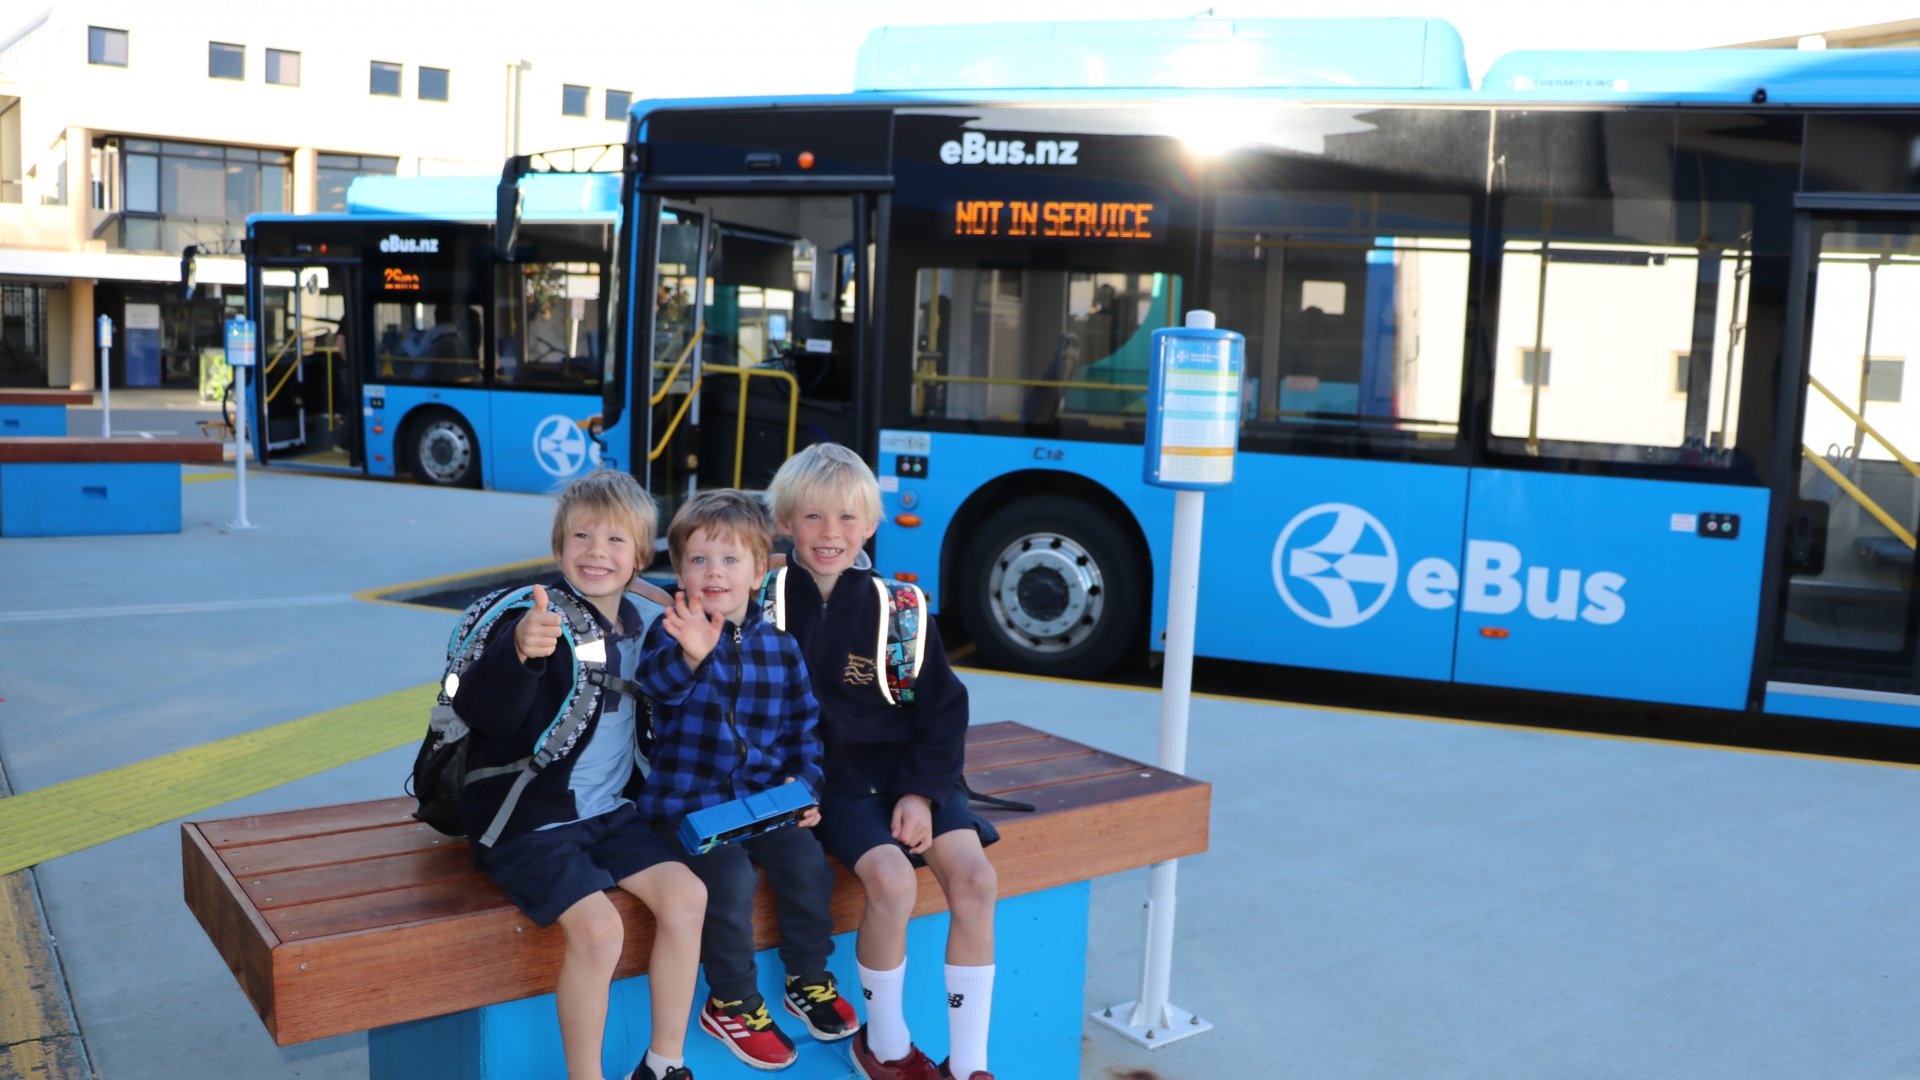 Xander, Hadley and Jayden on their way to school on the eBus